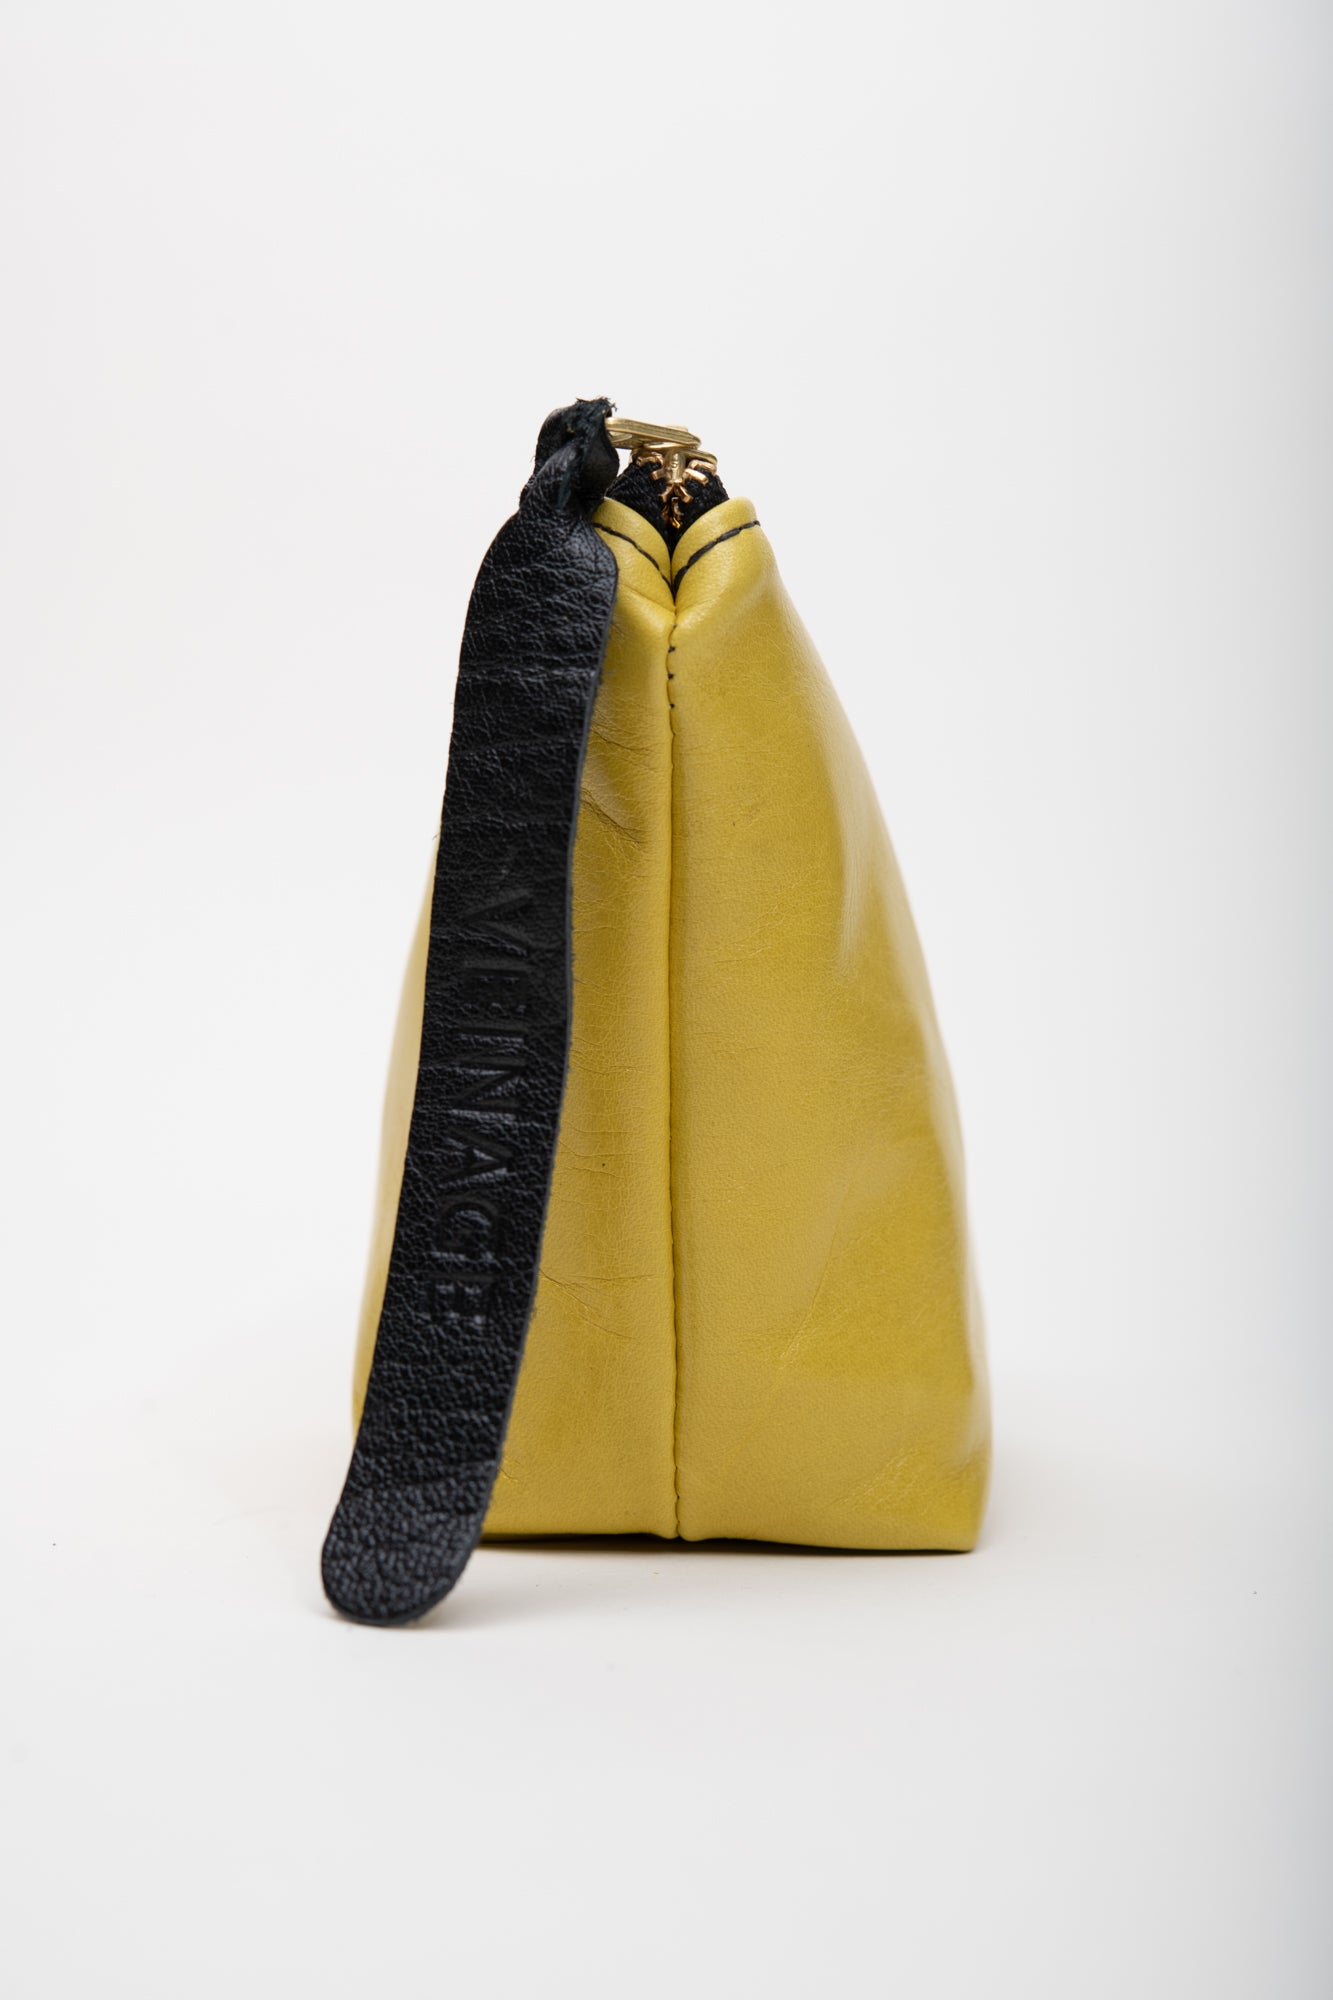 Veinage Garnier yellow leather pouch, handmade in Montreal, Canada